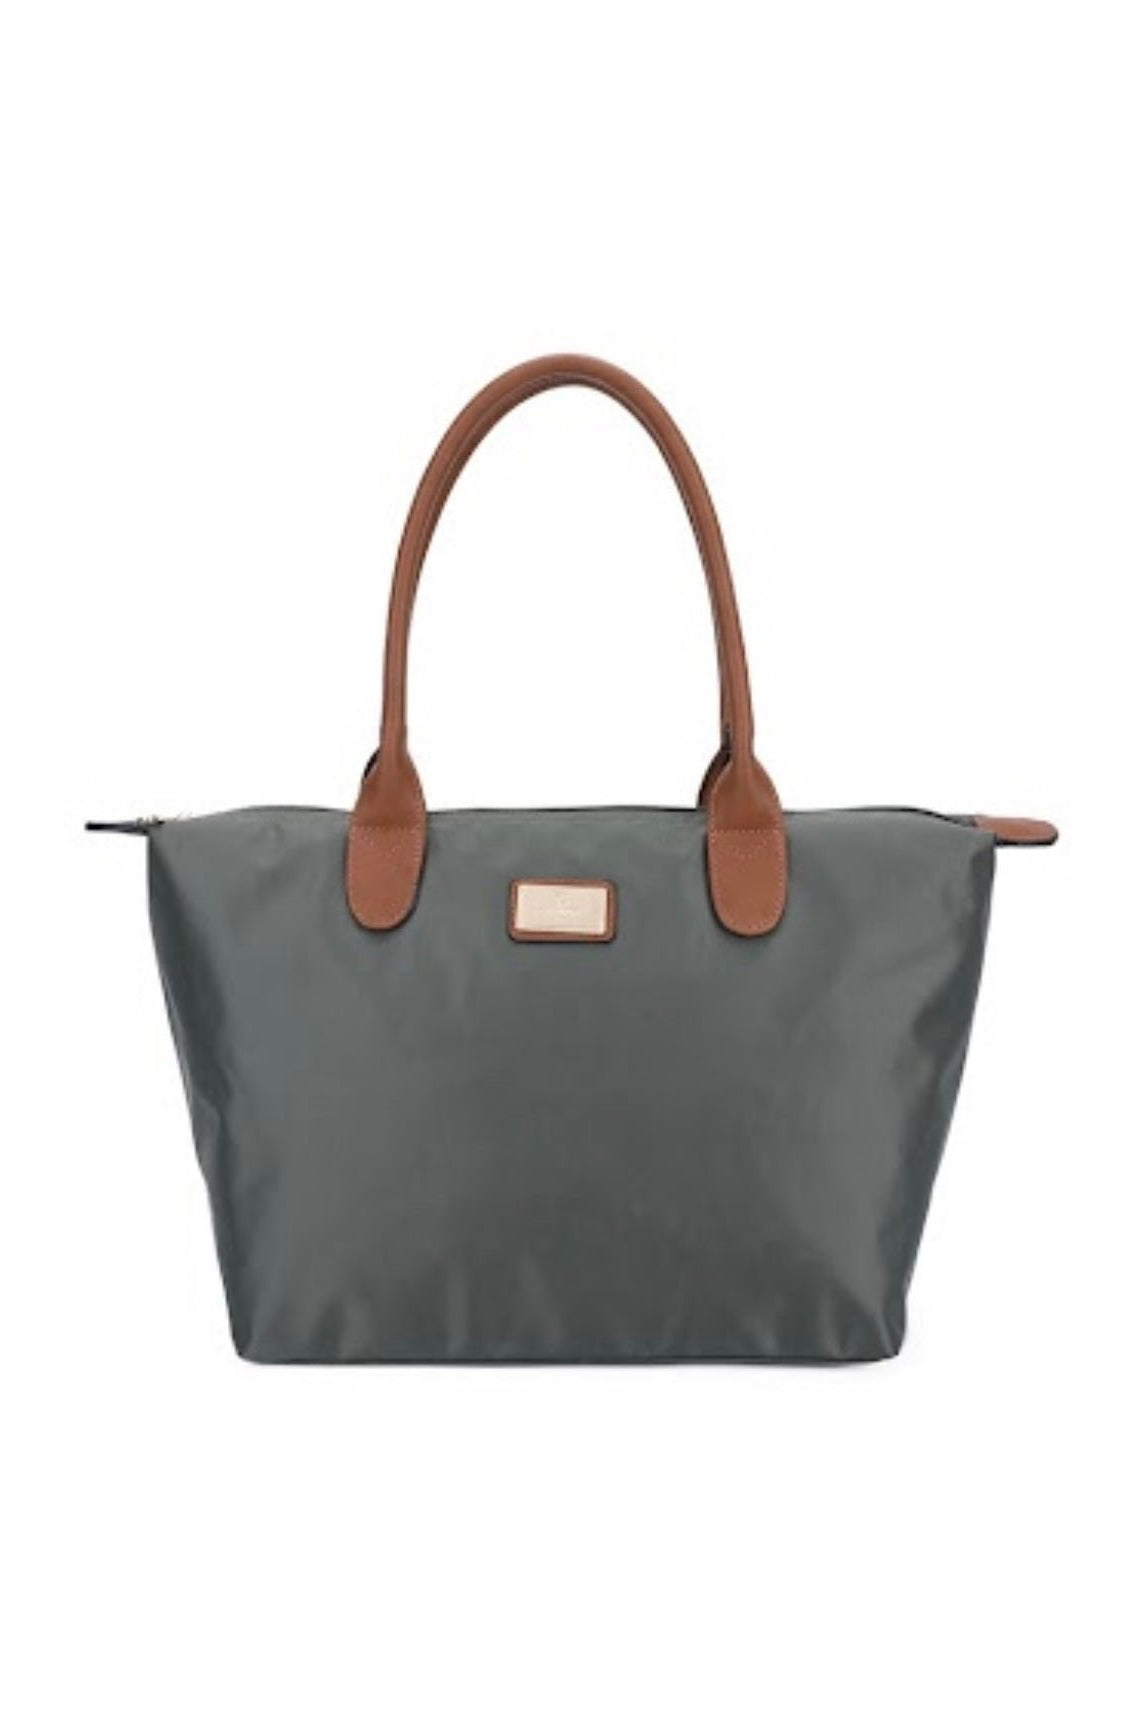 ♥︎STOCKHOLM BAG ARMY GREEN - My Favourites